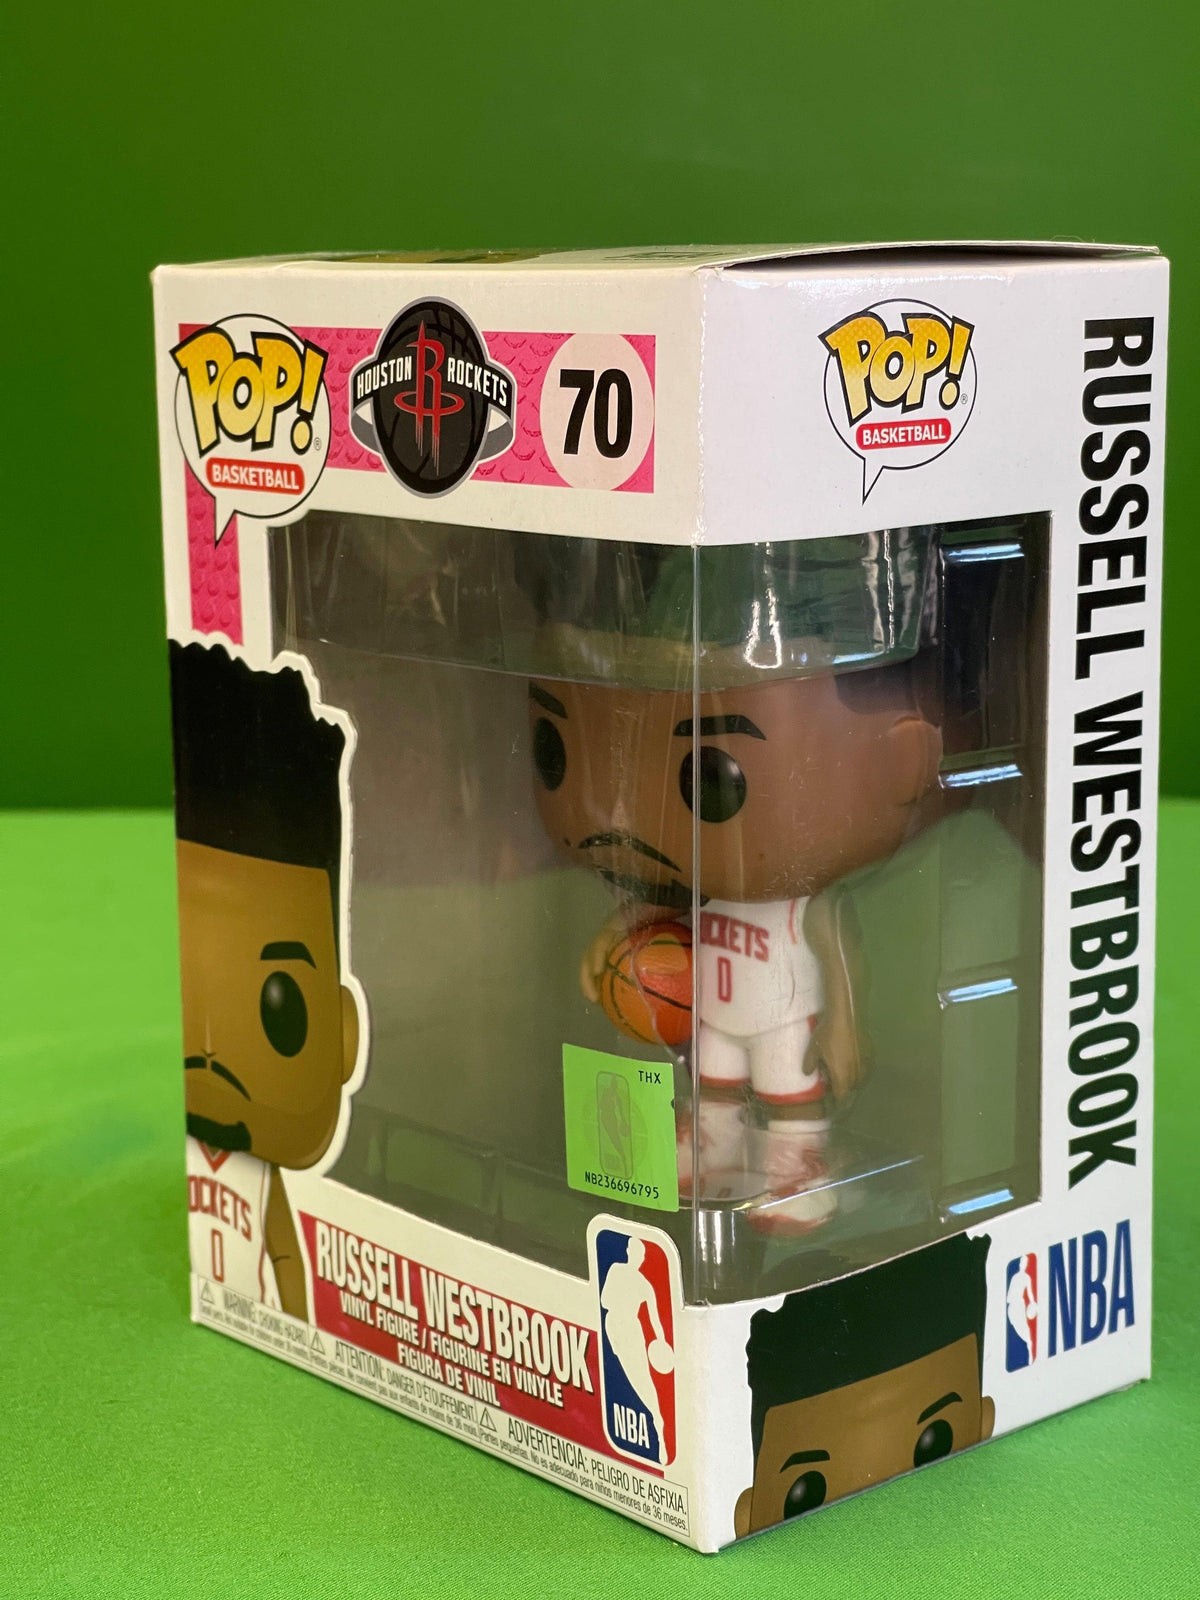 NBA Houston Rockets Russell Westbrook #0 Funko Pop Collectable NWT